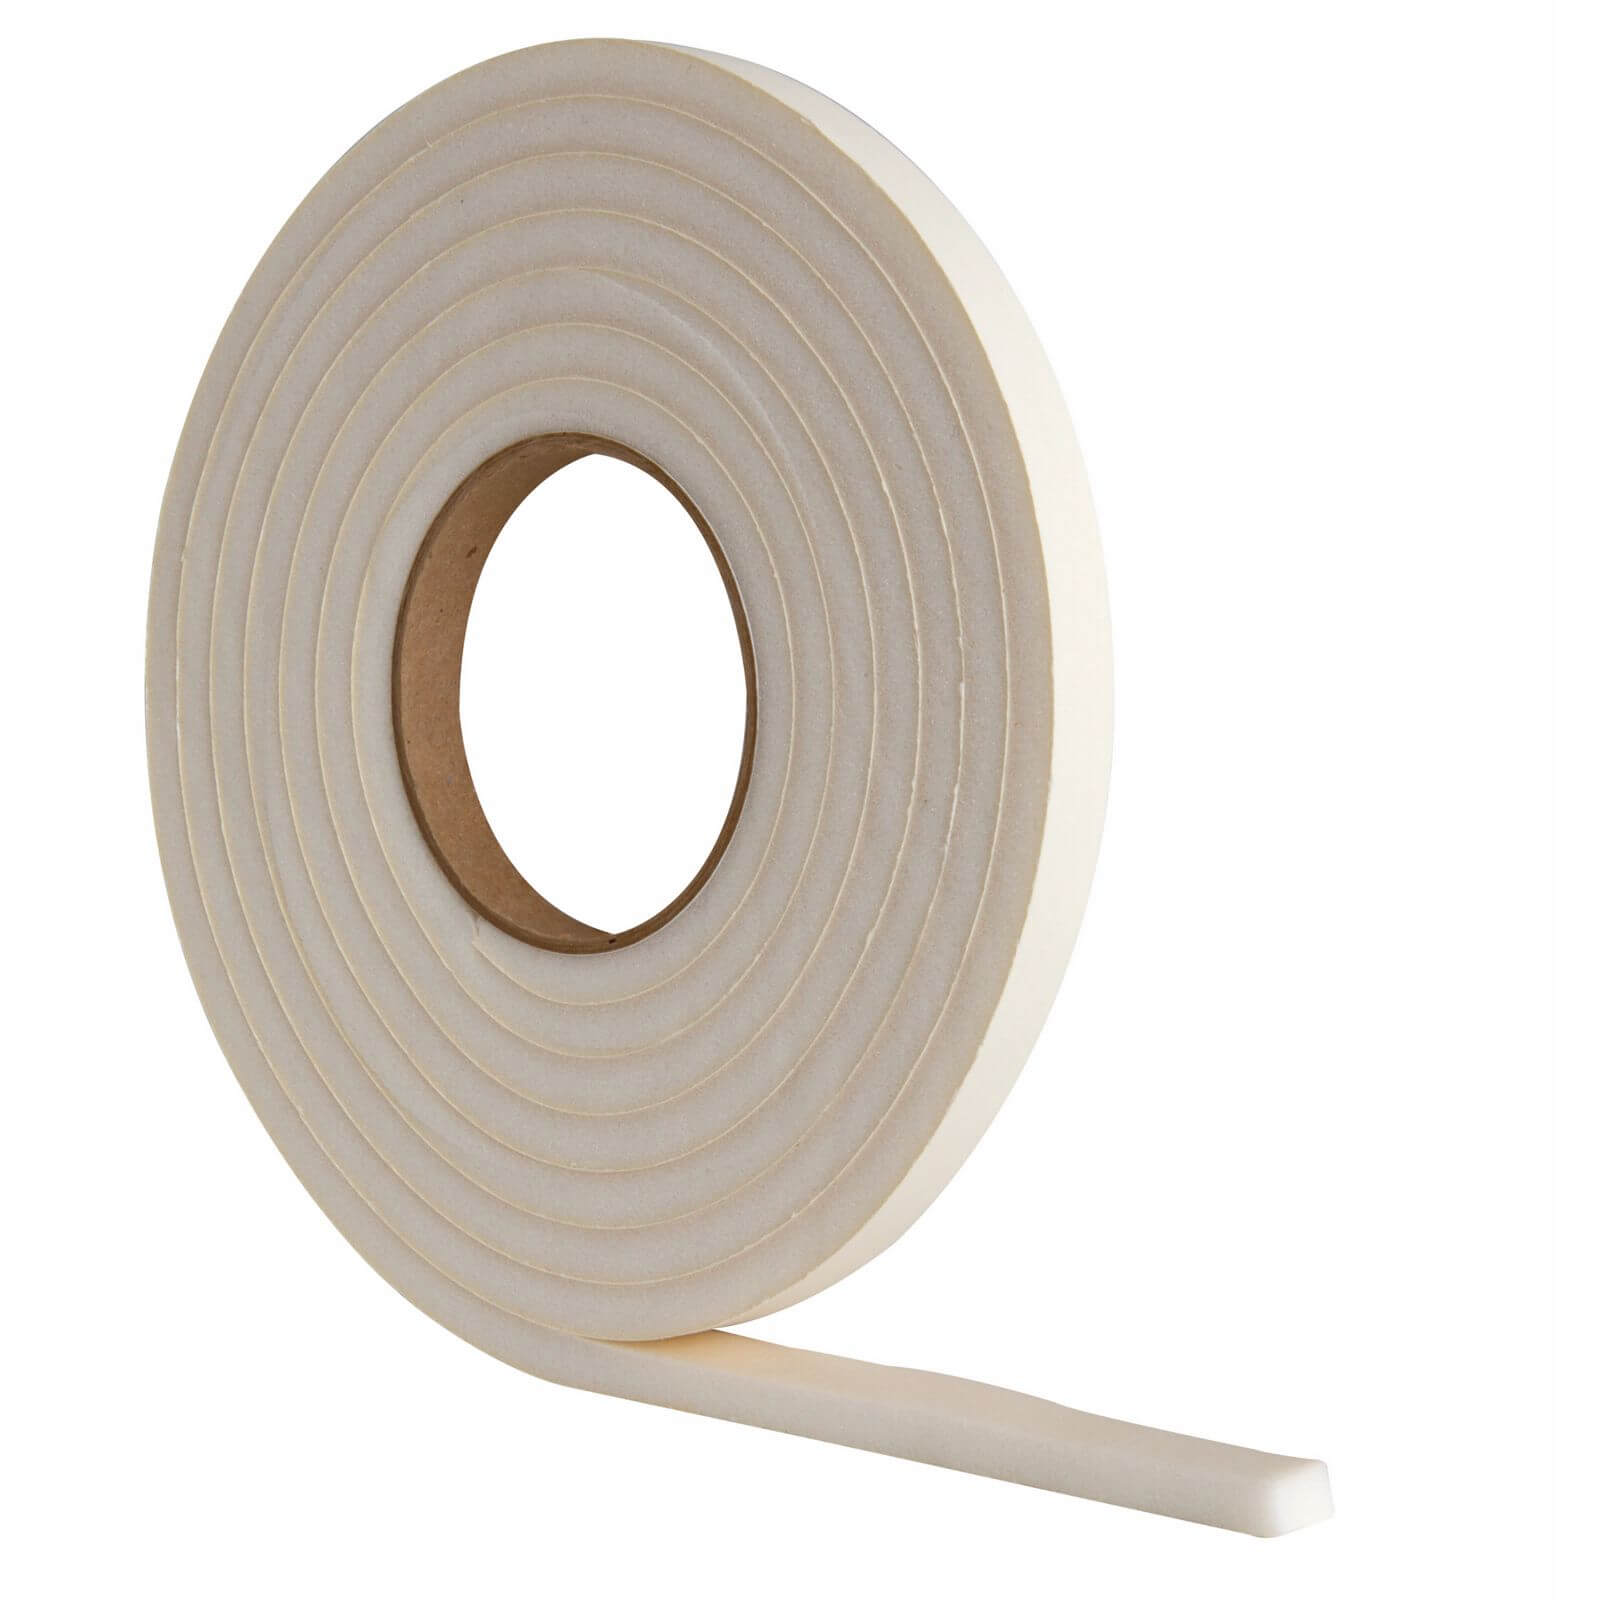 Photo of Extra Thick Foam Weather Door Seal - White - 3.5m